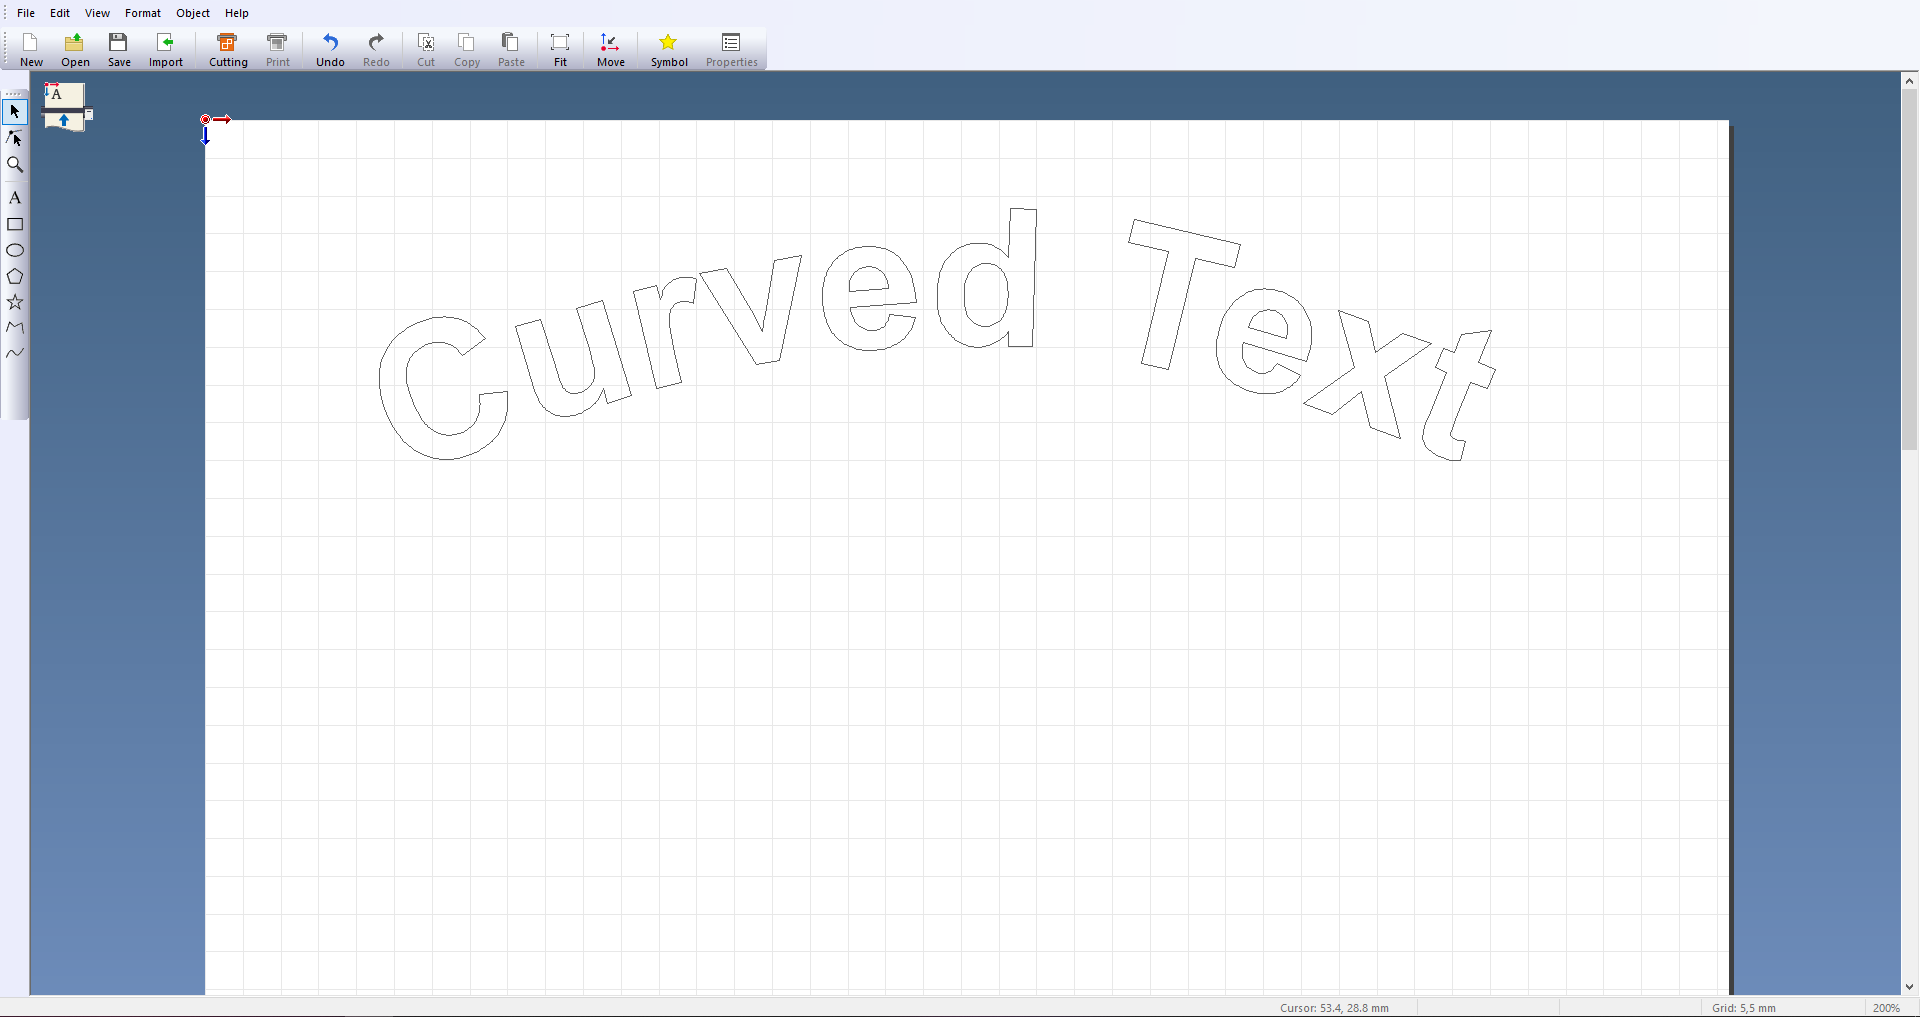 Curved text using CutStudio by Roland DG